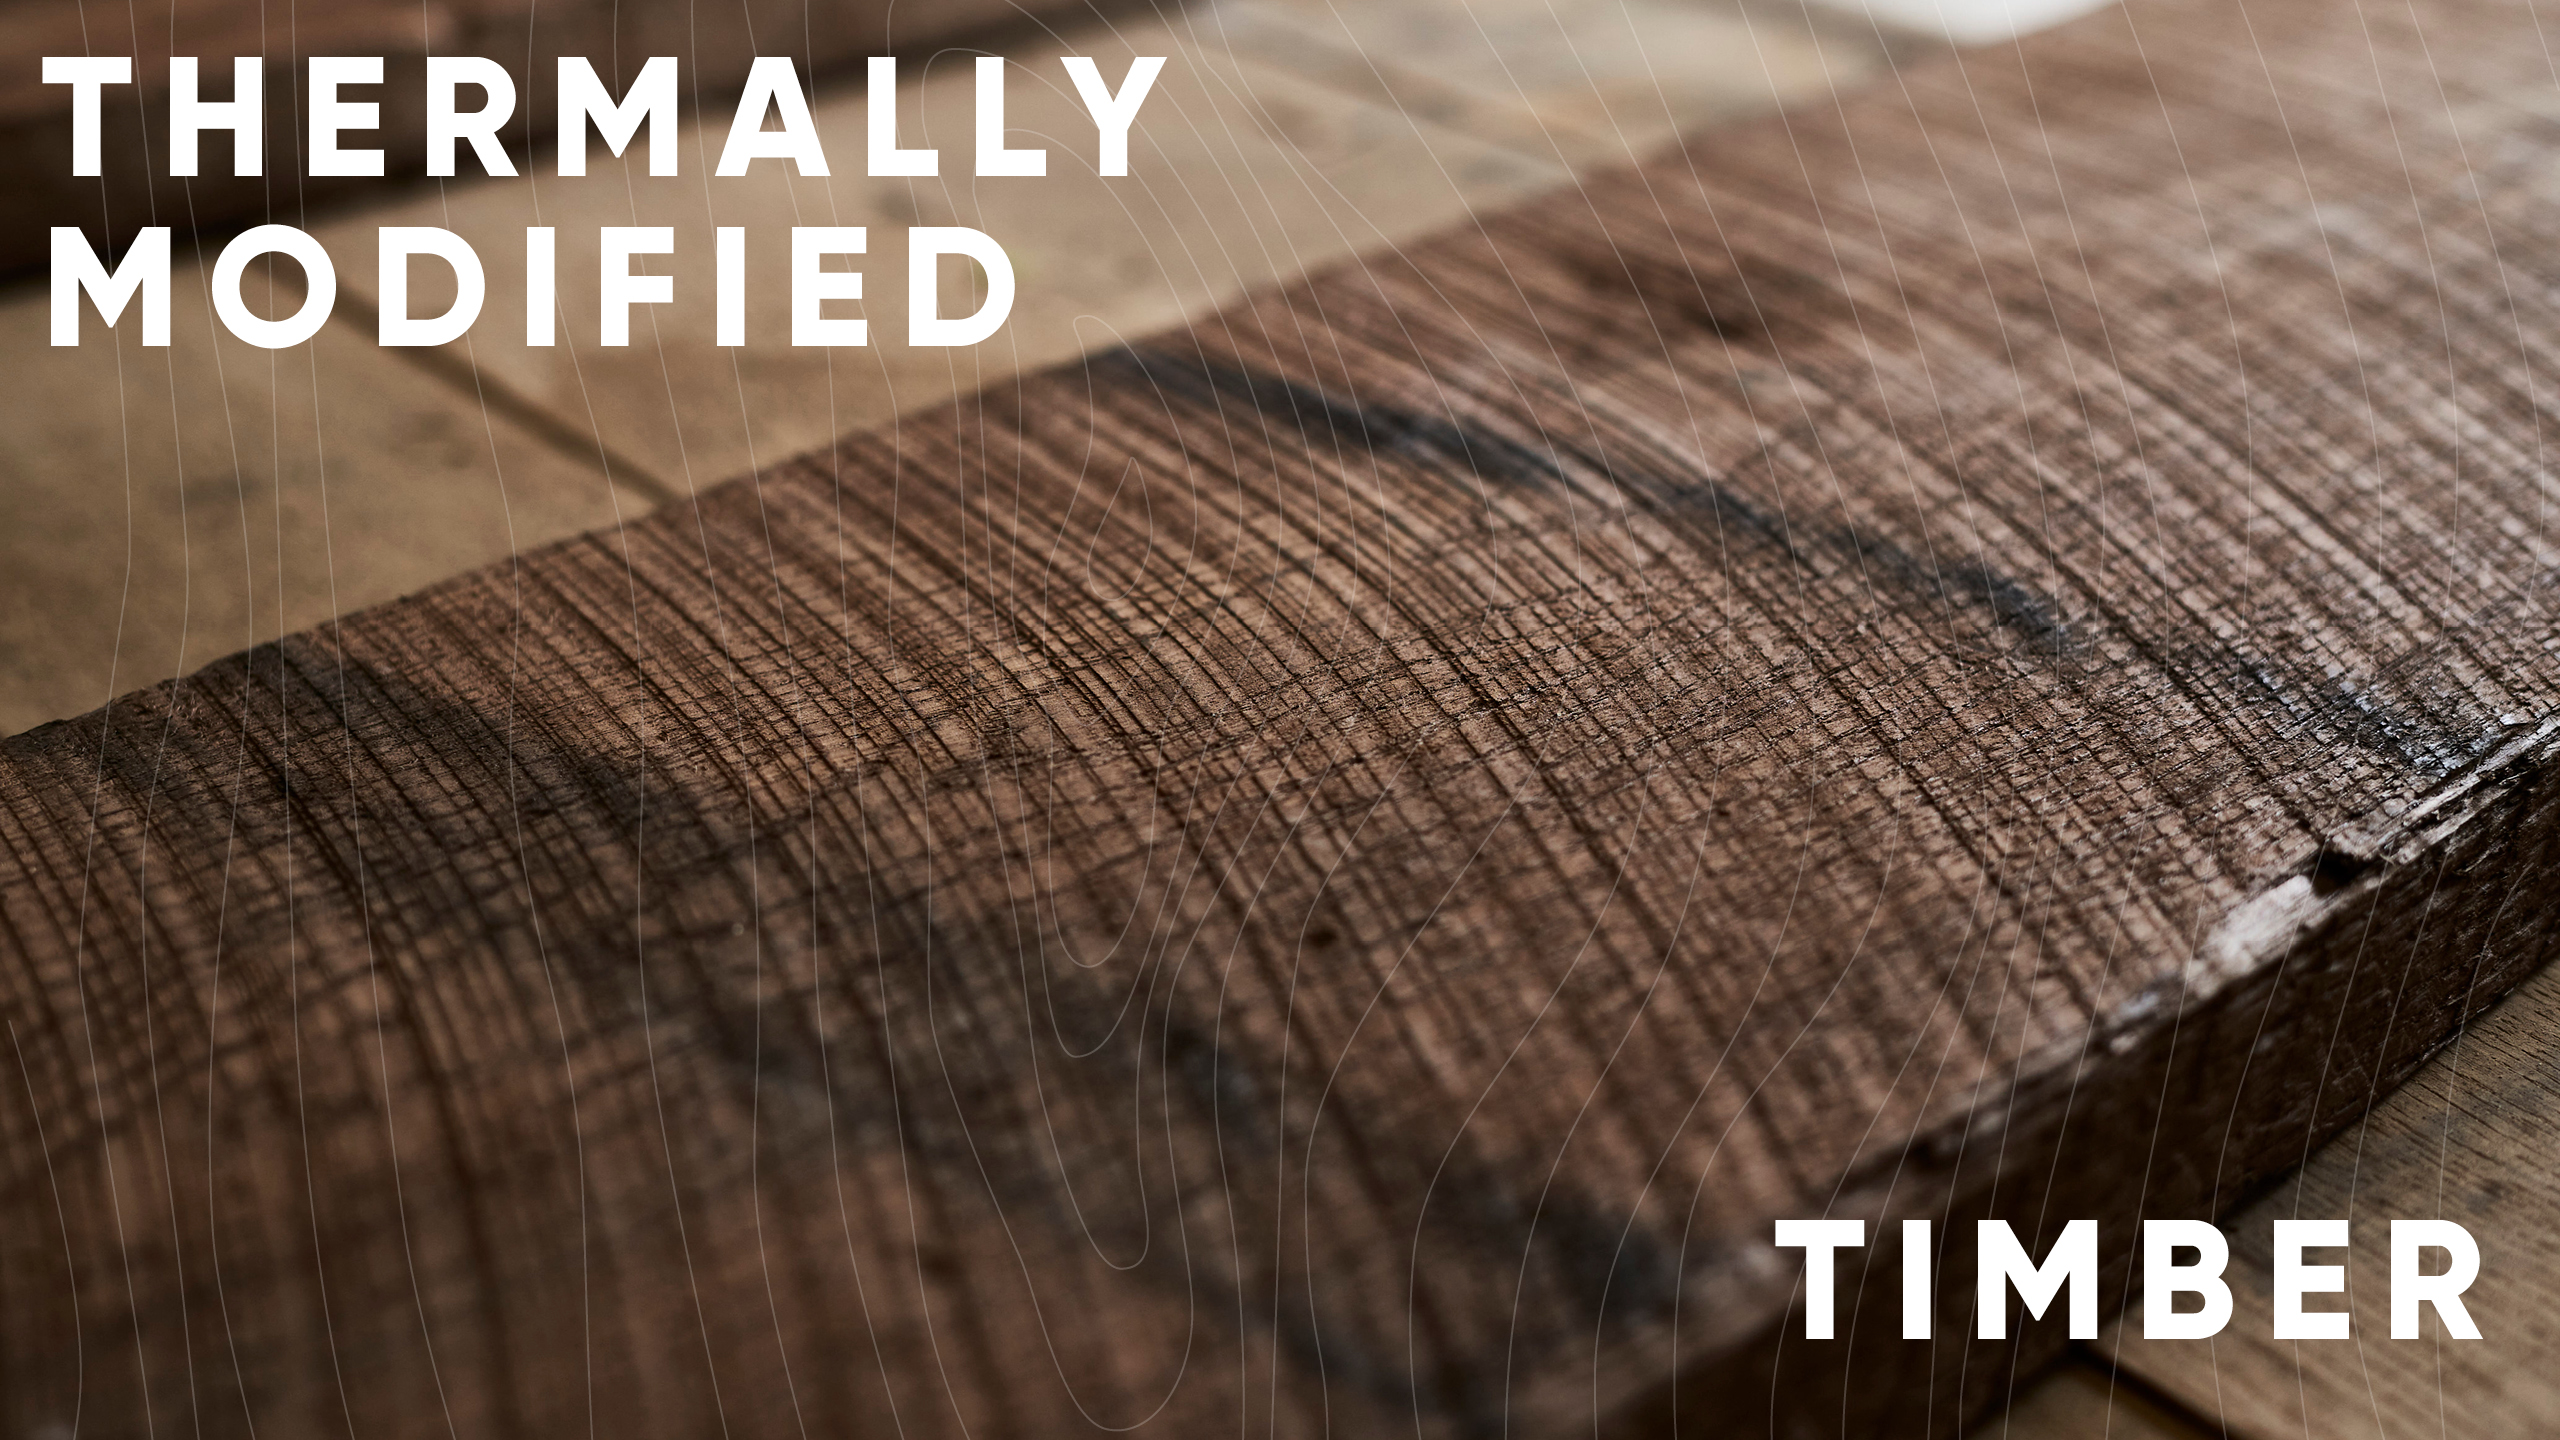 Words on Wood | Thermally modified timber with Jan Hendzel and Kirsten